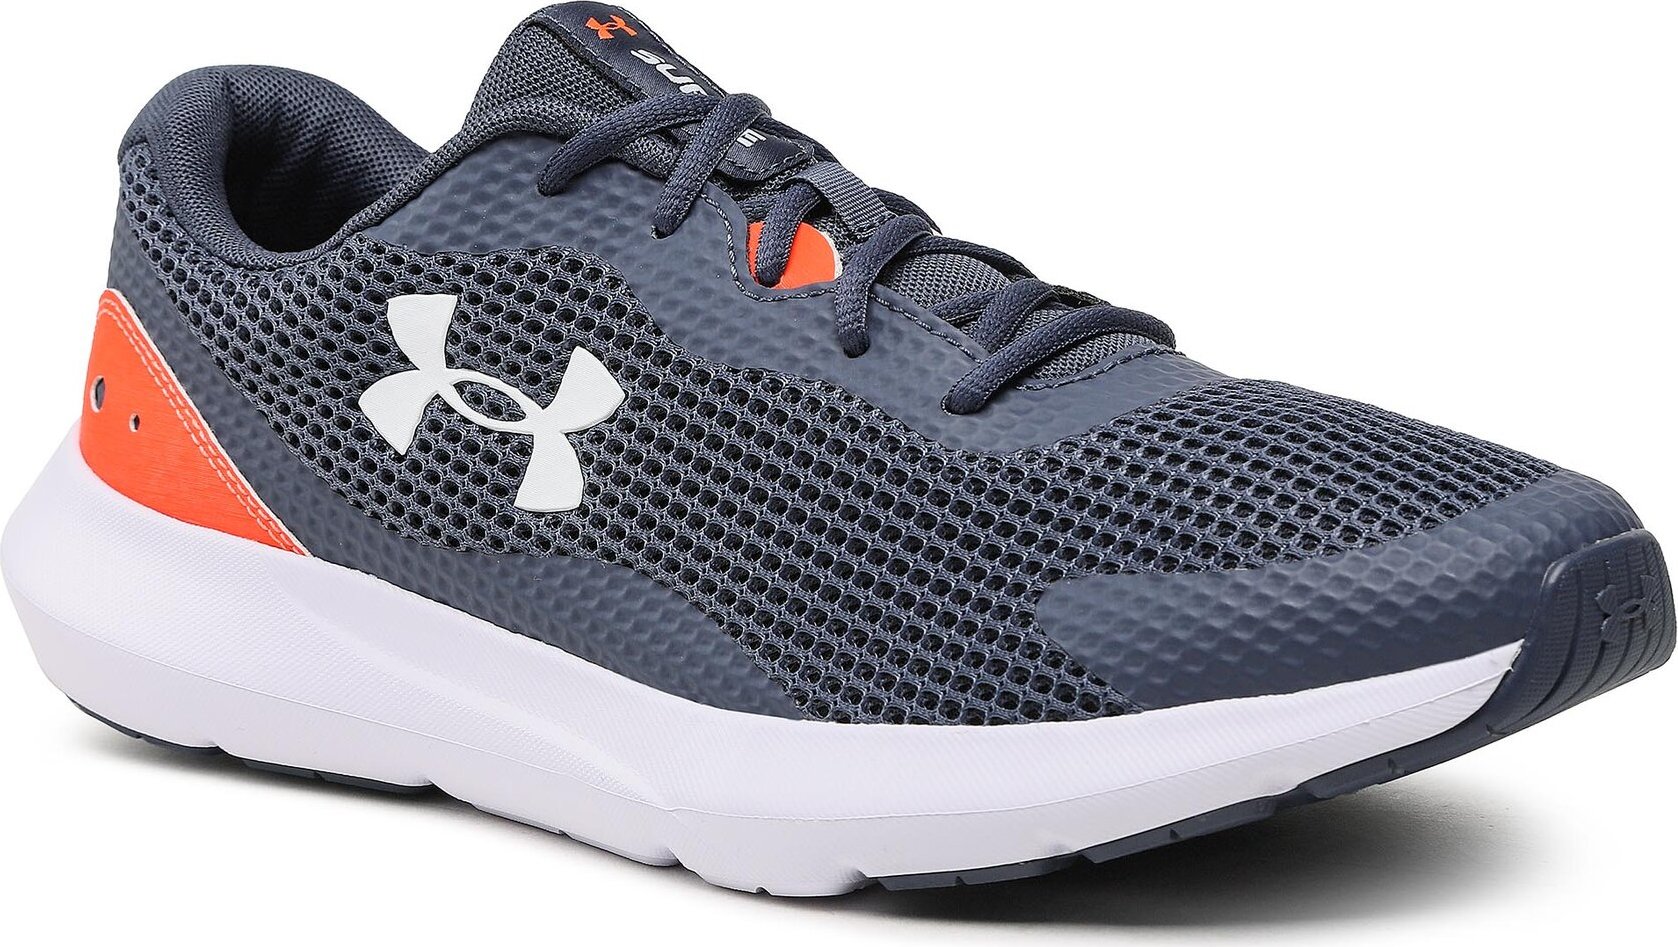 Boty Under Armour UA Surge 3 3024883-404 Down Pour Gray/Afterburn/White